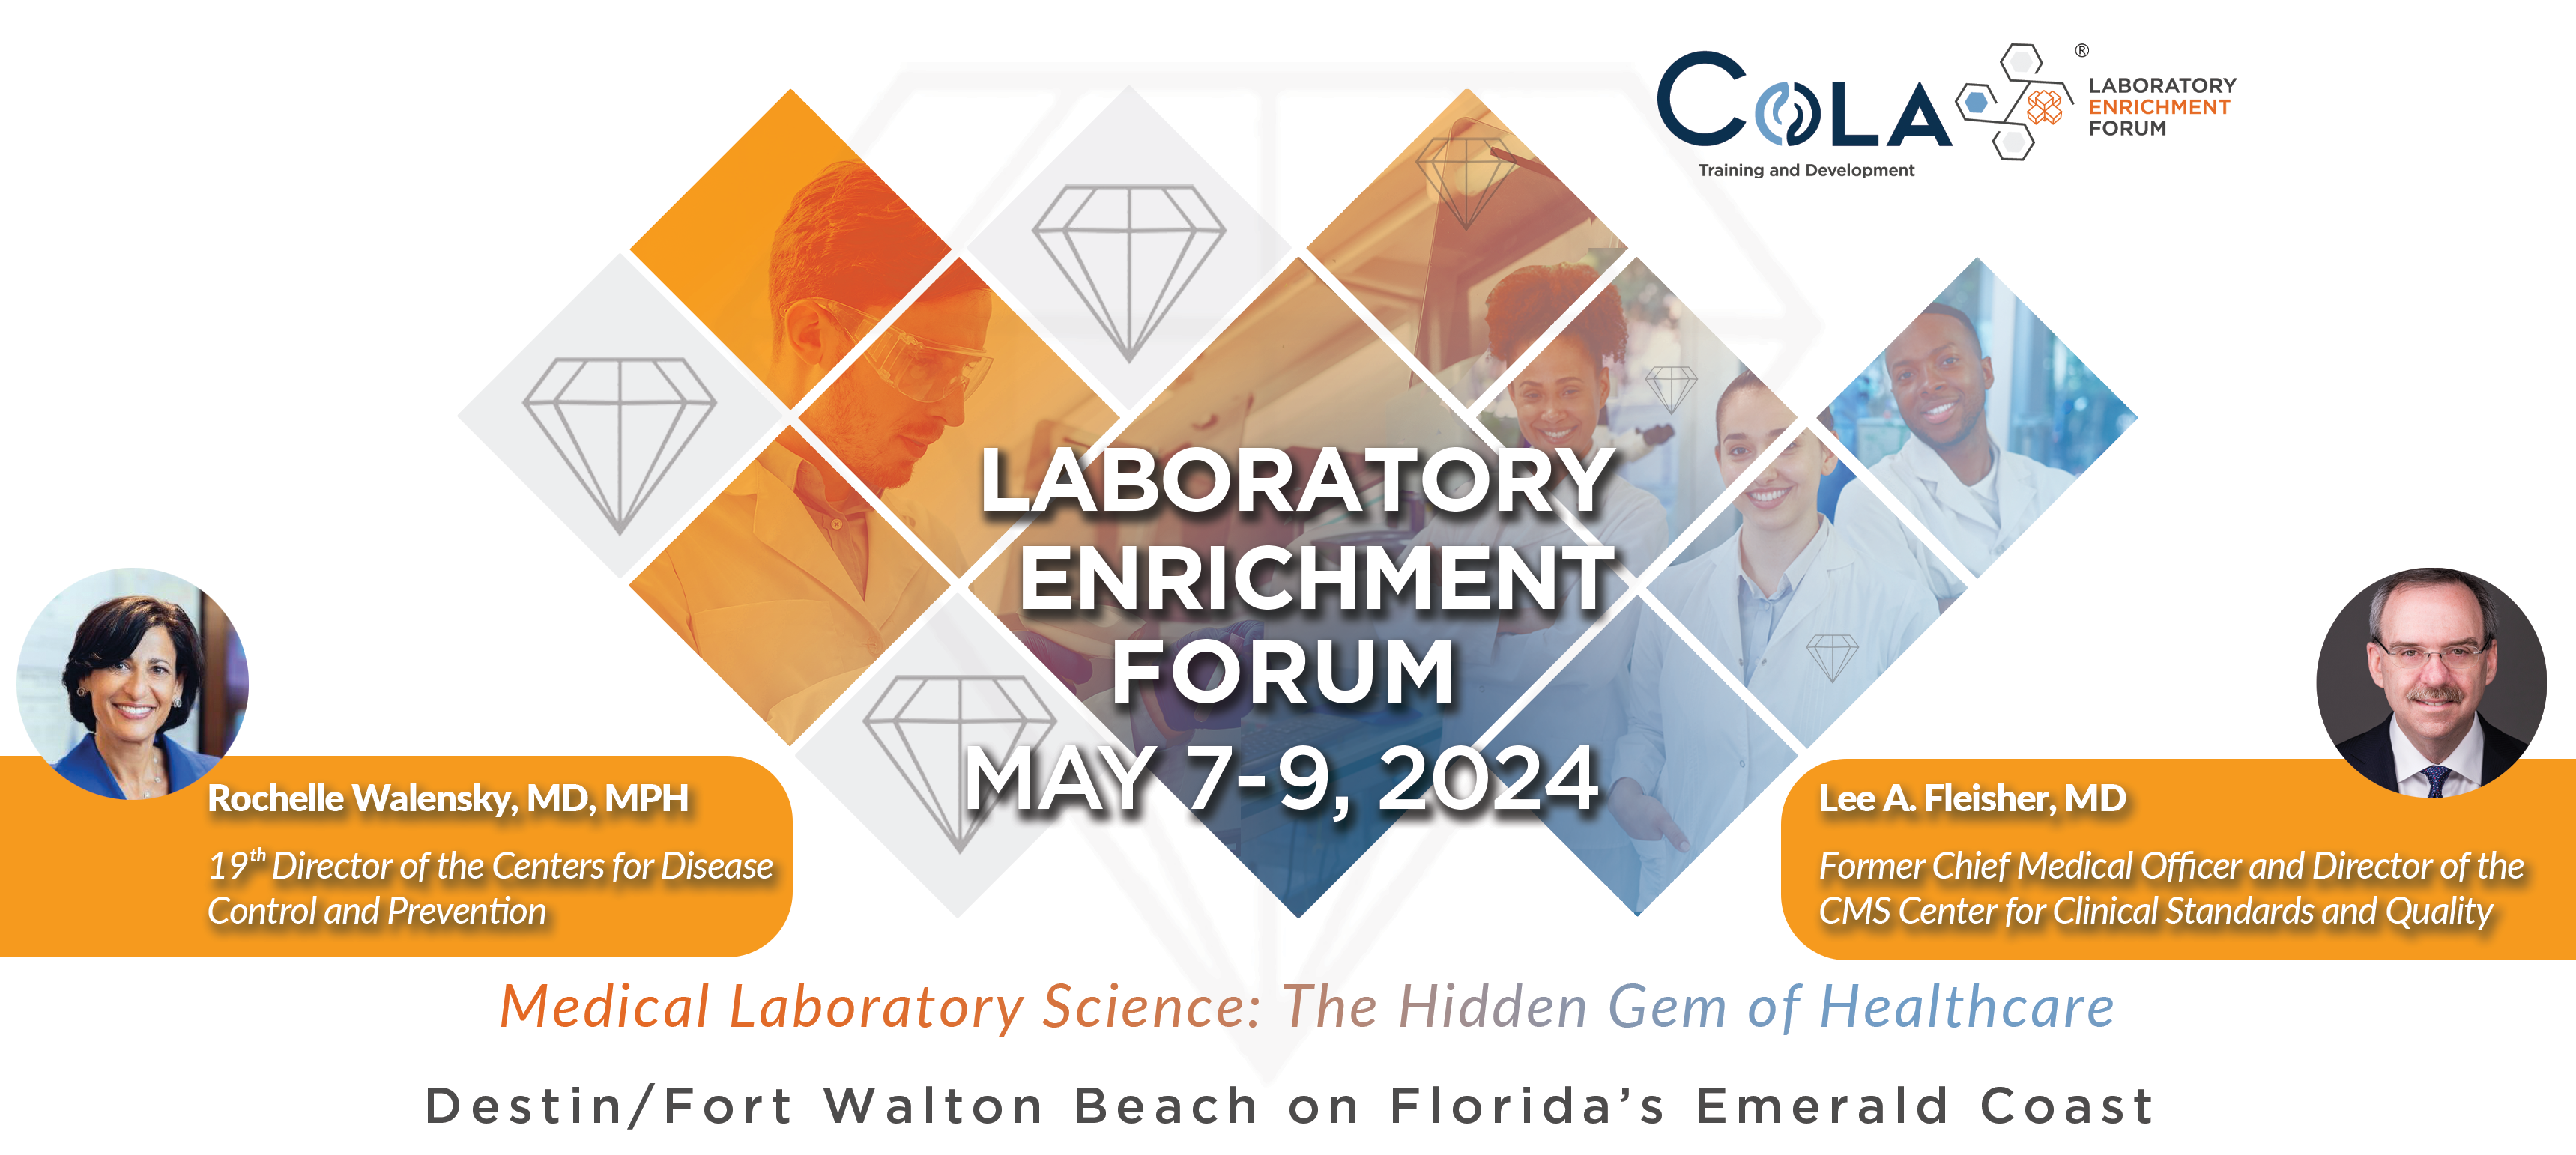 Rochelle Walensky, MD, MPH and Lee Fleisher, MD, to be Keynote Speakers for COLA’s Third Annual Laboratory Enrichment Forum